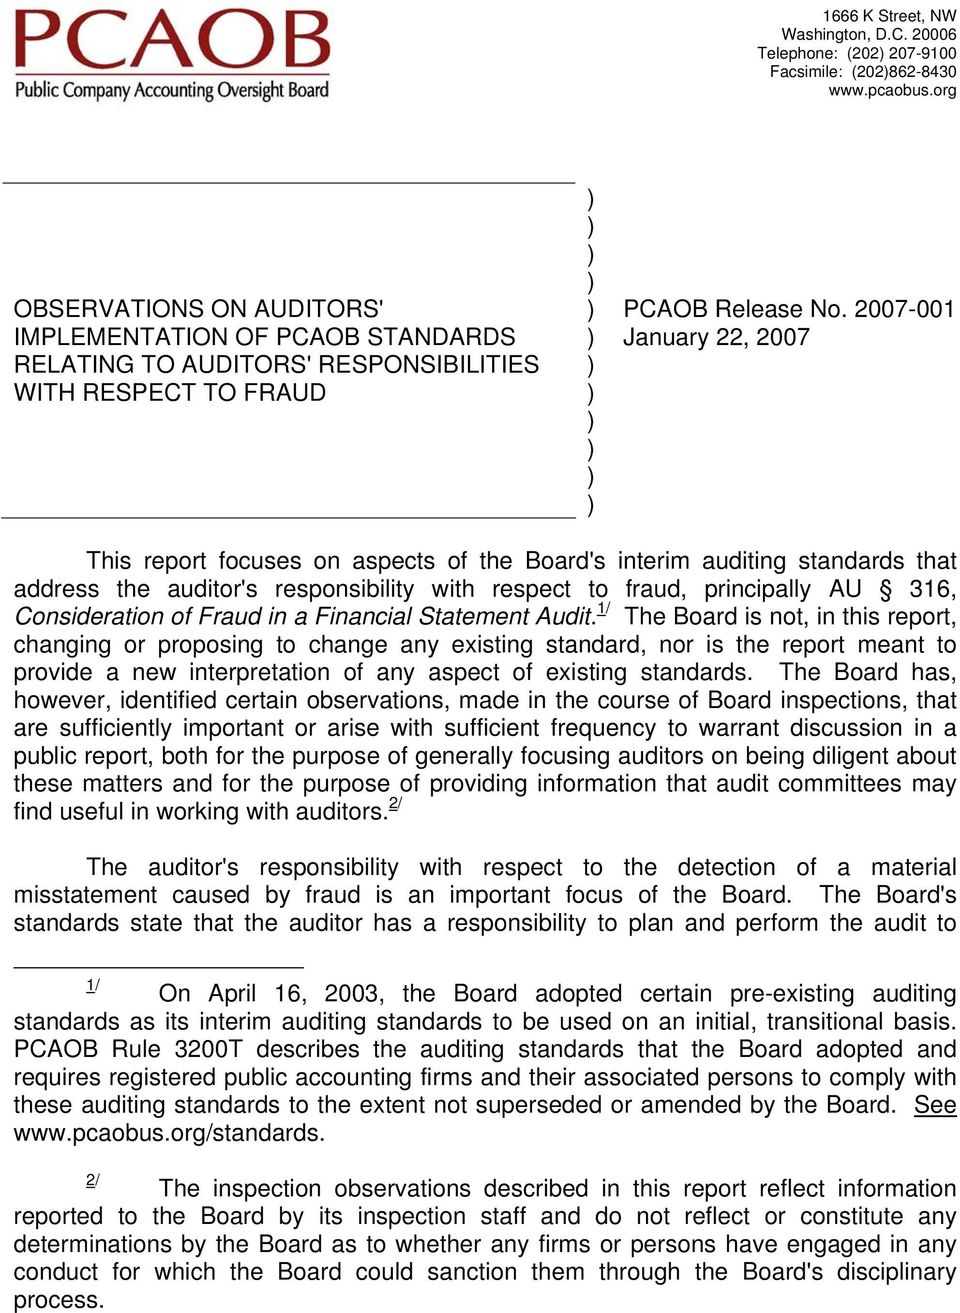 2007-001 This report focuses on aspects of the Board's interim auditing standards that address the auditor's responsibility with respect to fraud, principally AU 316, Consideration of Fraud in a